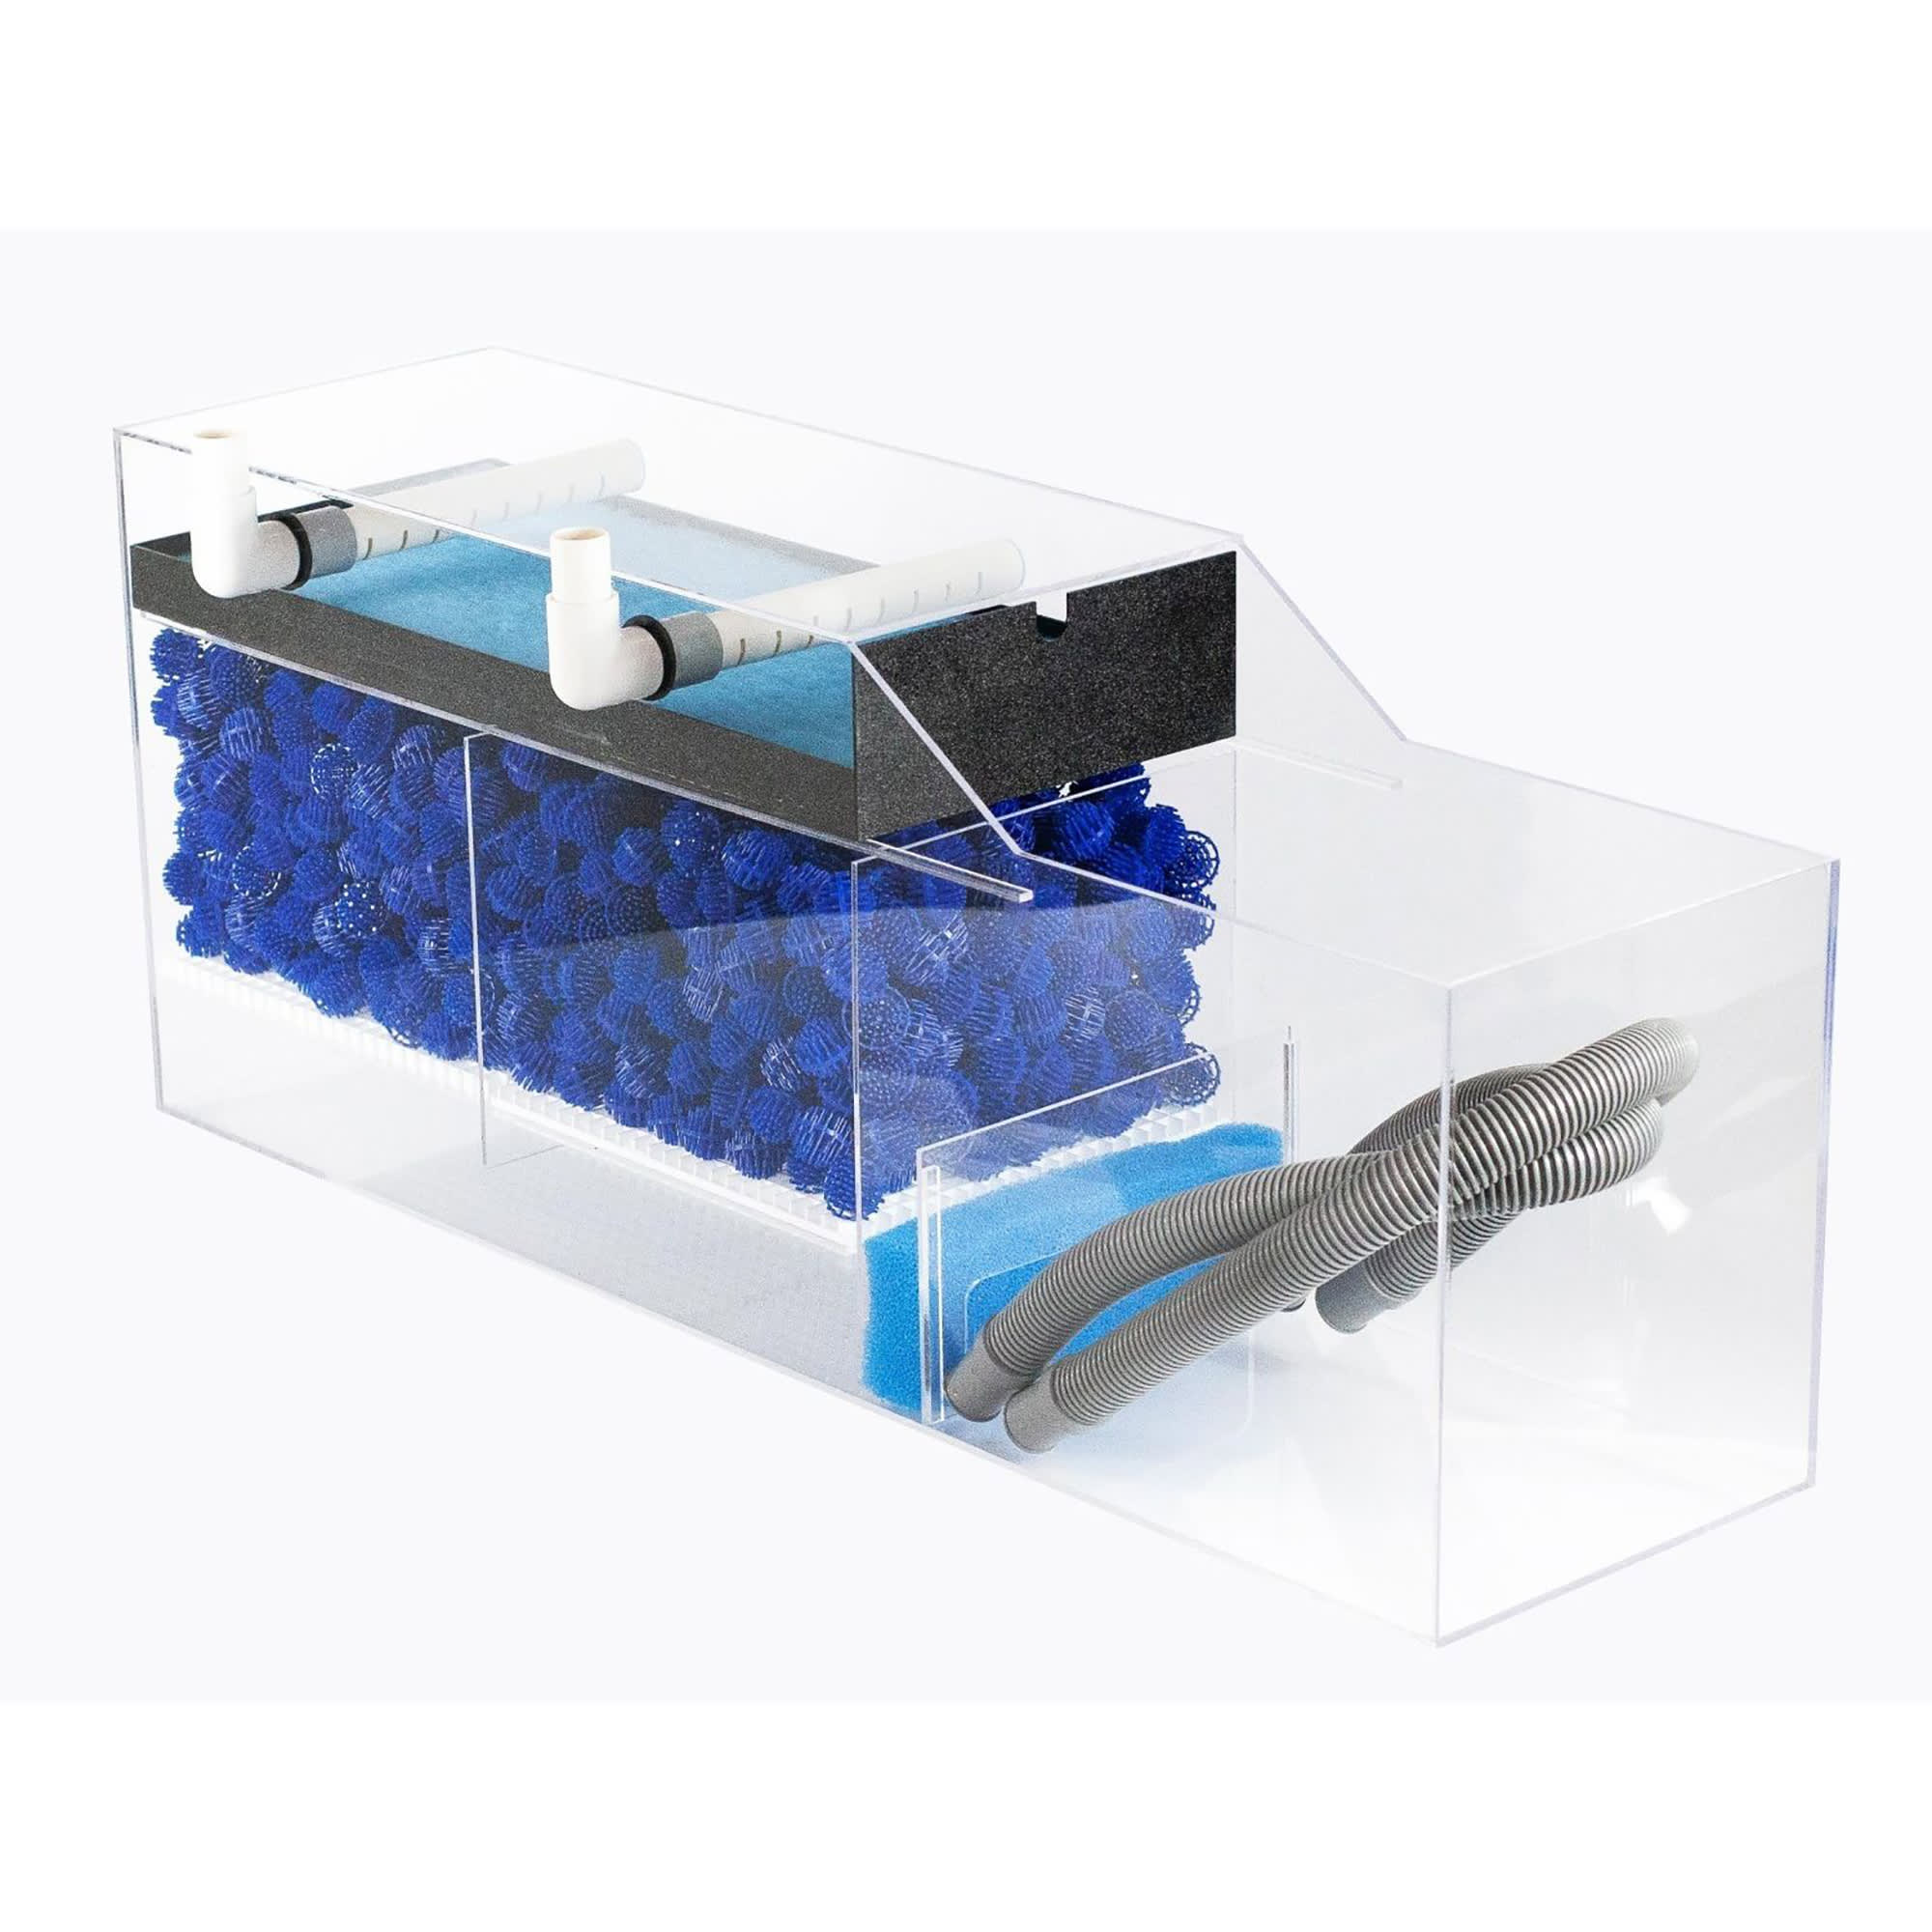 Pro Clear Aquatic Systems Premier Wet Dry Filter 700 Gph Petco,Baby Red Ear Slider Turtles